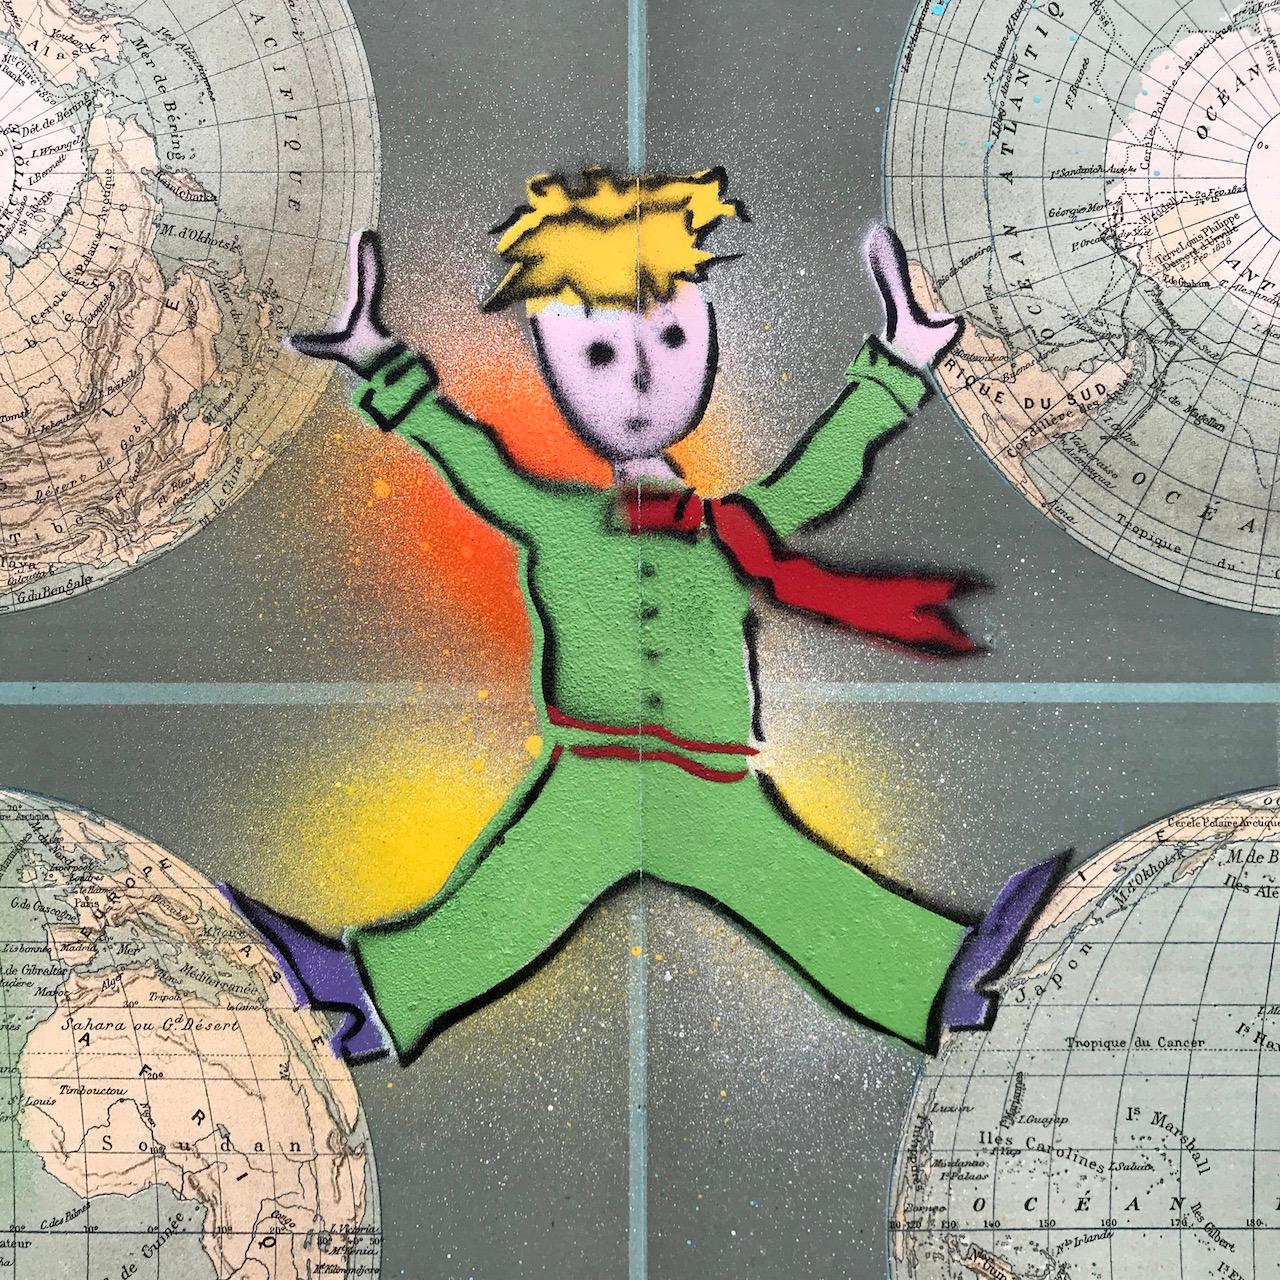 The world in his hands - the little Prince
 2021
Multilayer stencil on a map of an old Atlas of geography of 1891 (beginning of the century with possible cornices, trimmings or folds)
37 x 46 cm
( Sold unframed ) 
190 euros